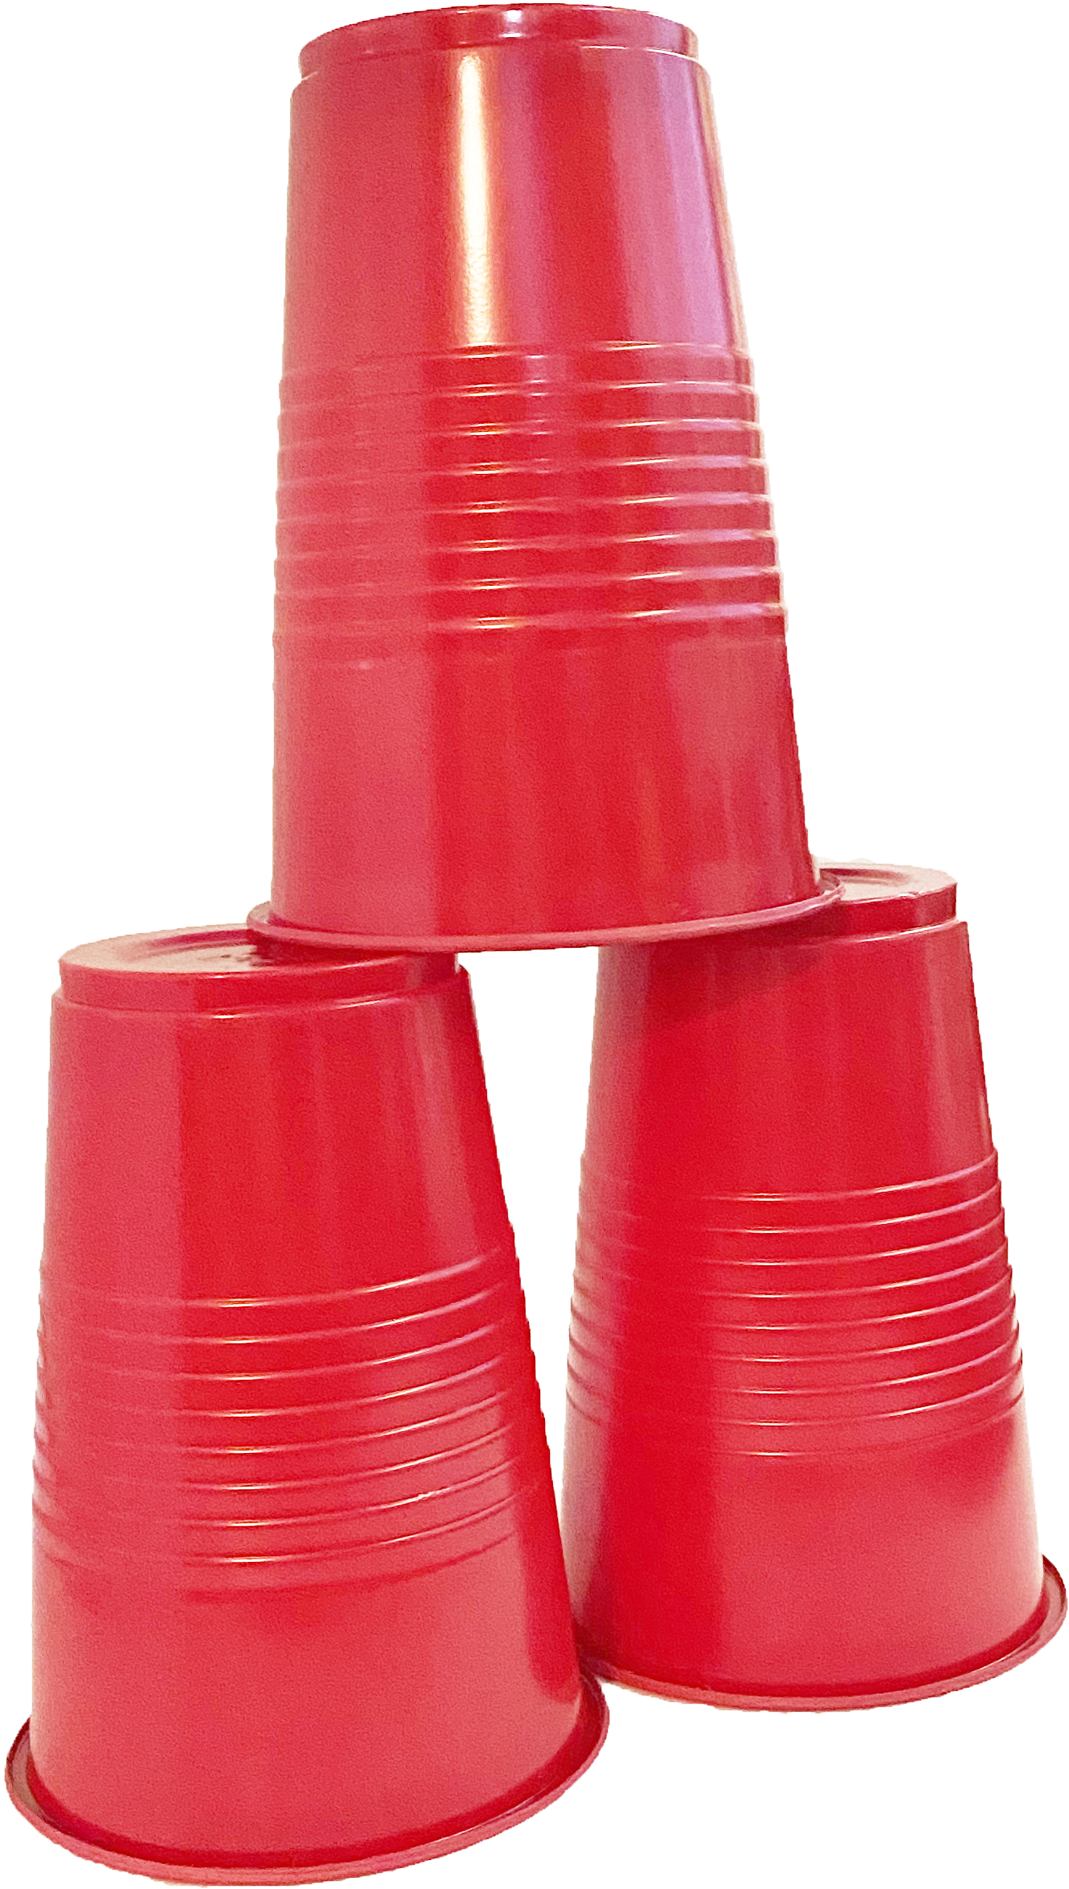 Why Are Party Cups Red?